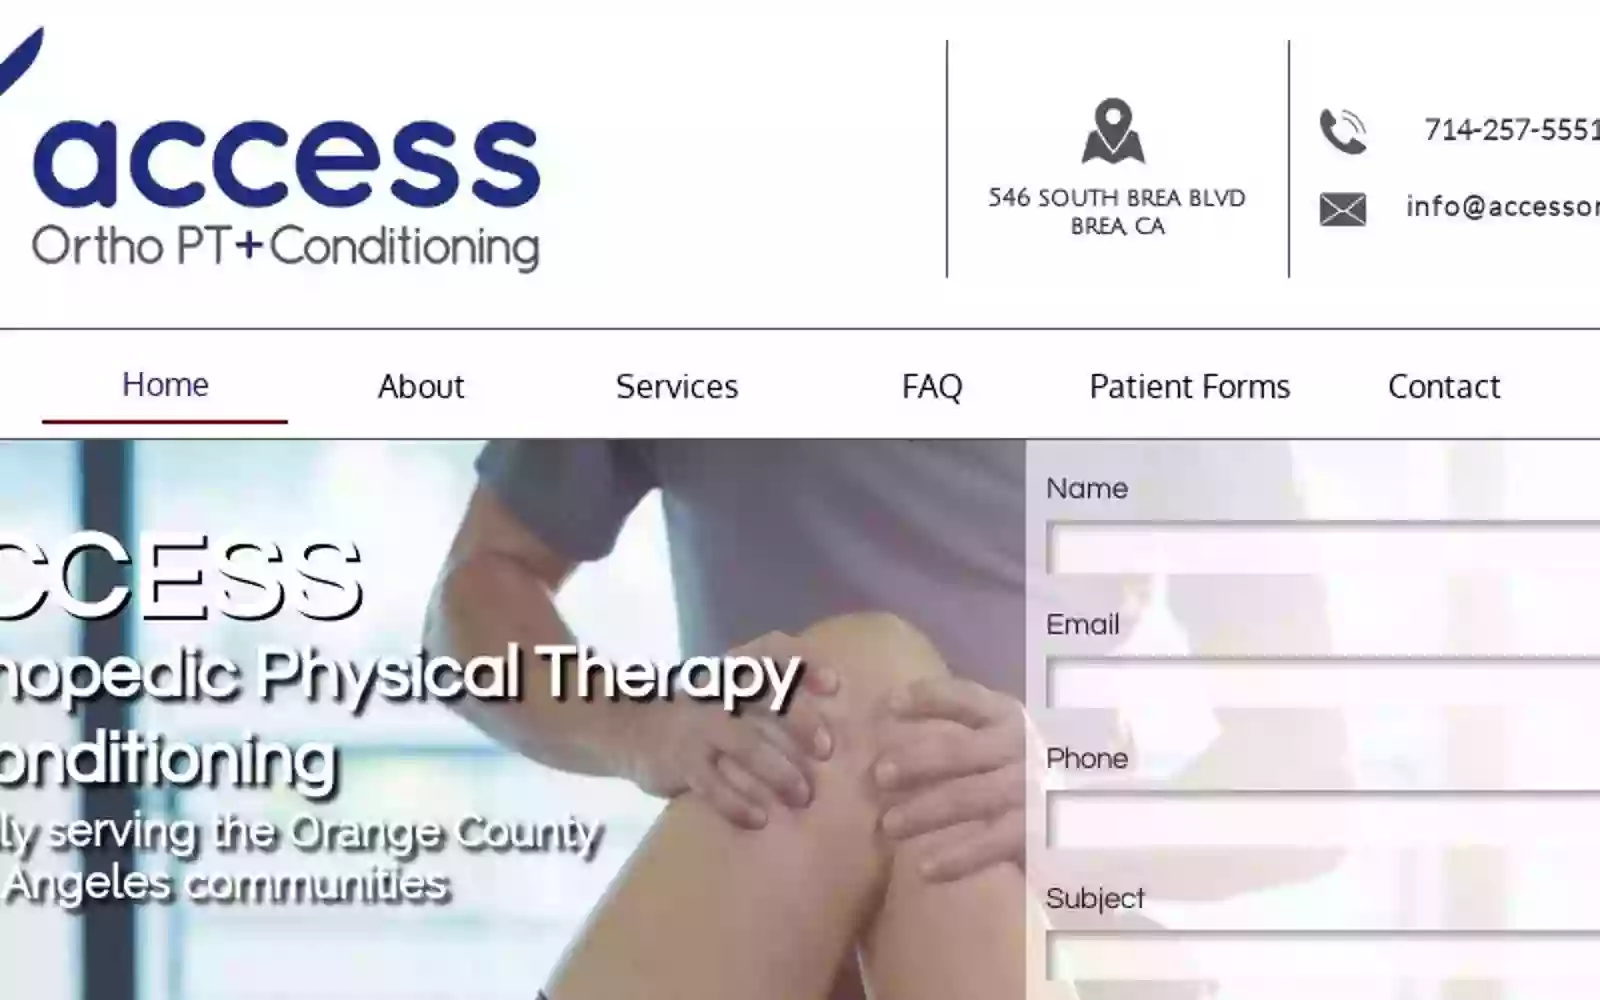 Access Orthopedic Physical Therapy and Conditioning